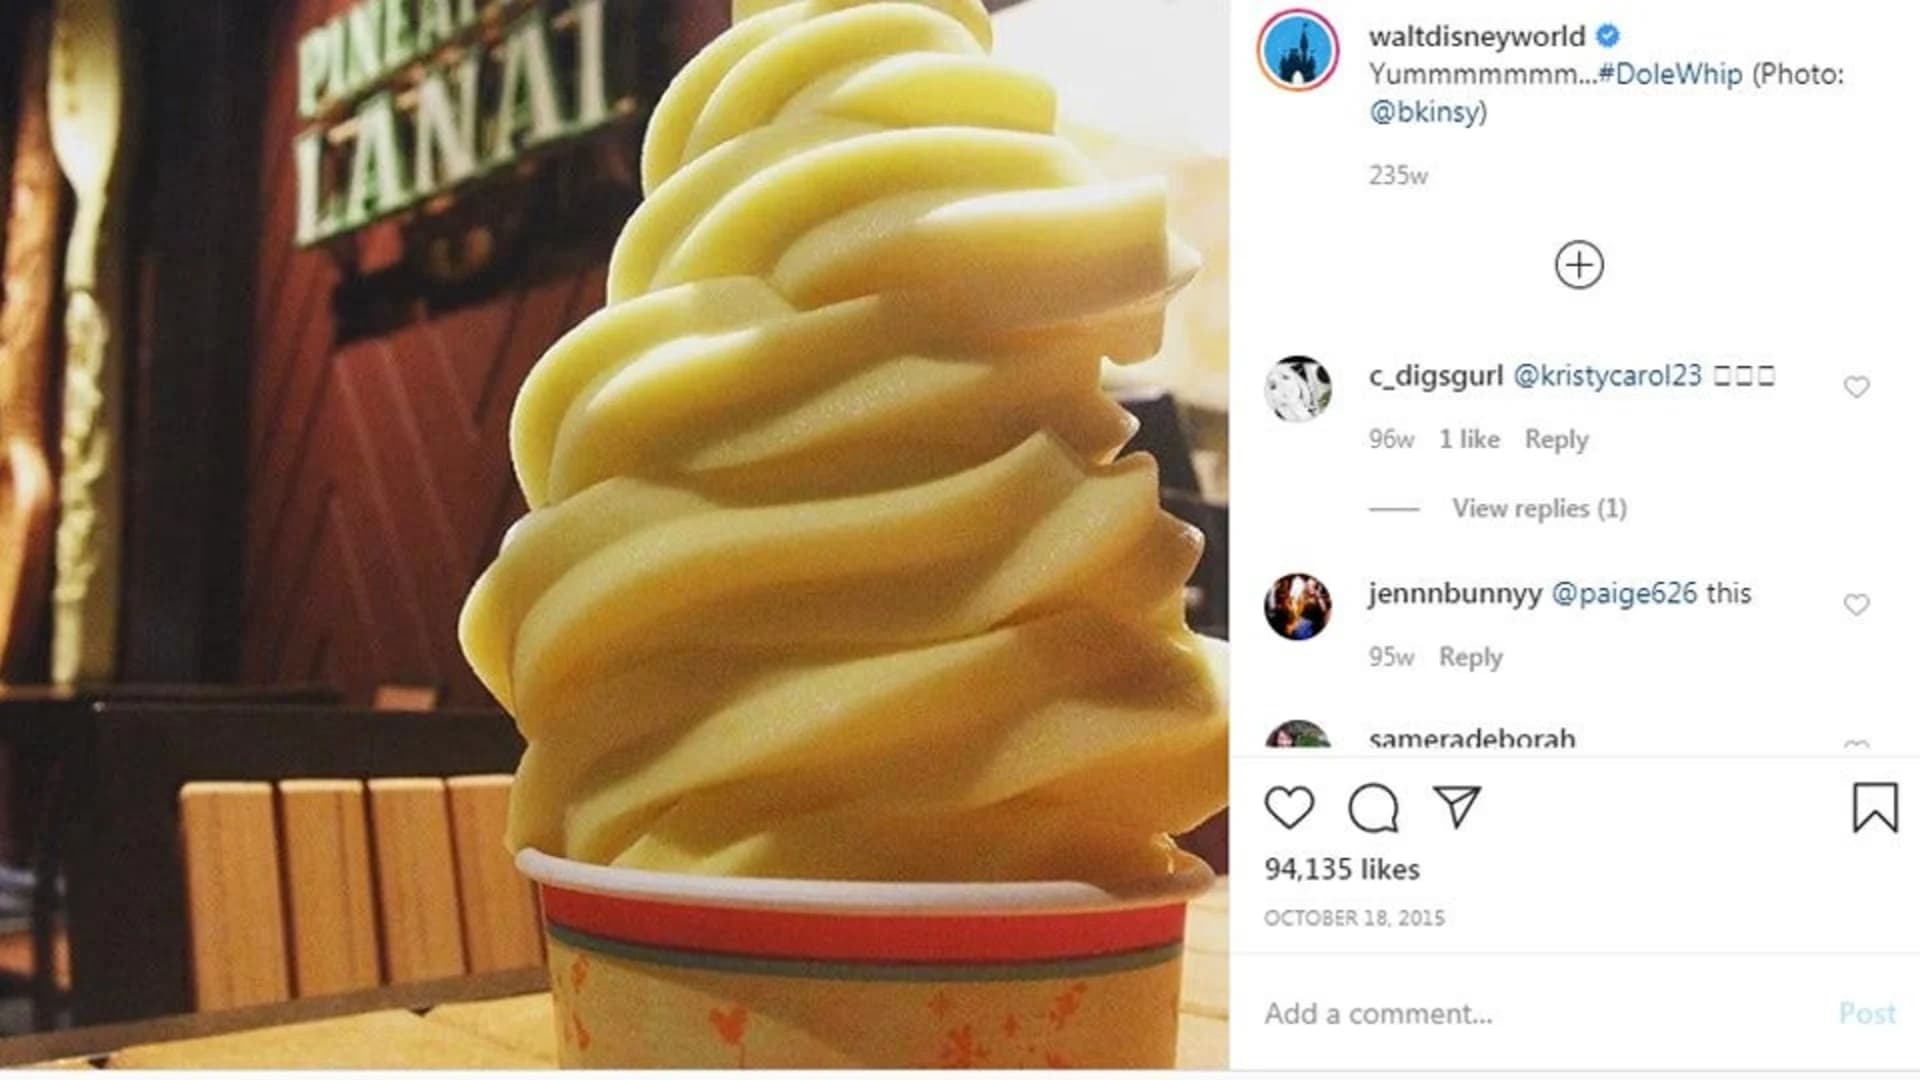 Disney releases recipe to iconic Dole Whip snack amid park shutdowns